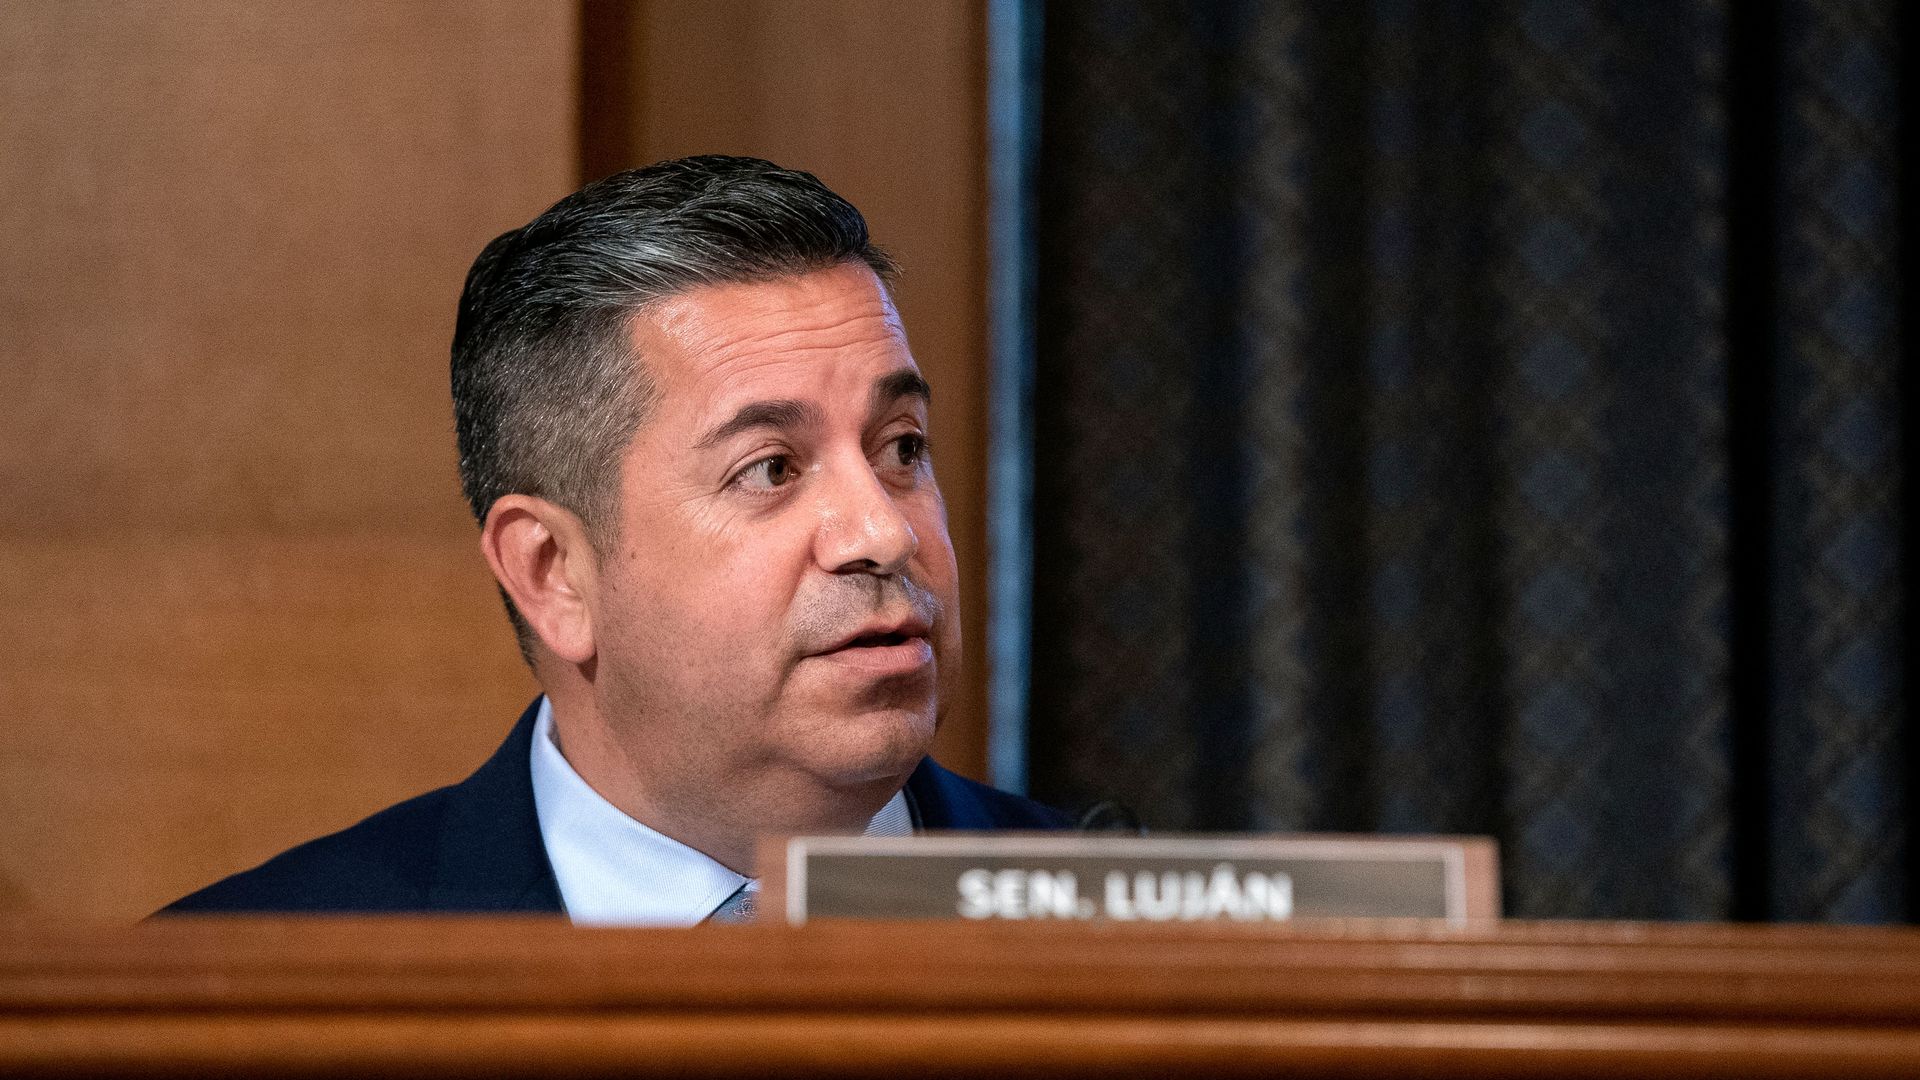 Senator Ben Ray Luján (D-NM) speaks during the Senate Health, Education, Labor, and Pensions Committee hearing on Capitol Hill in Washington,DC on July 20, 2021.